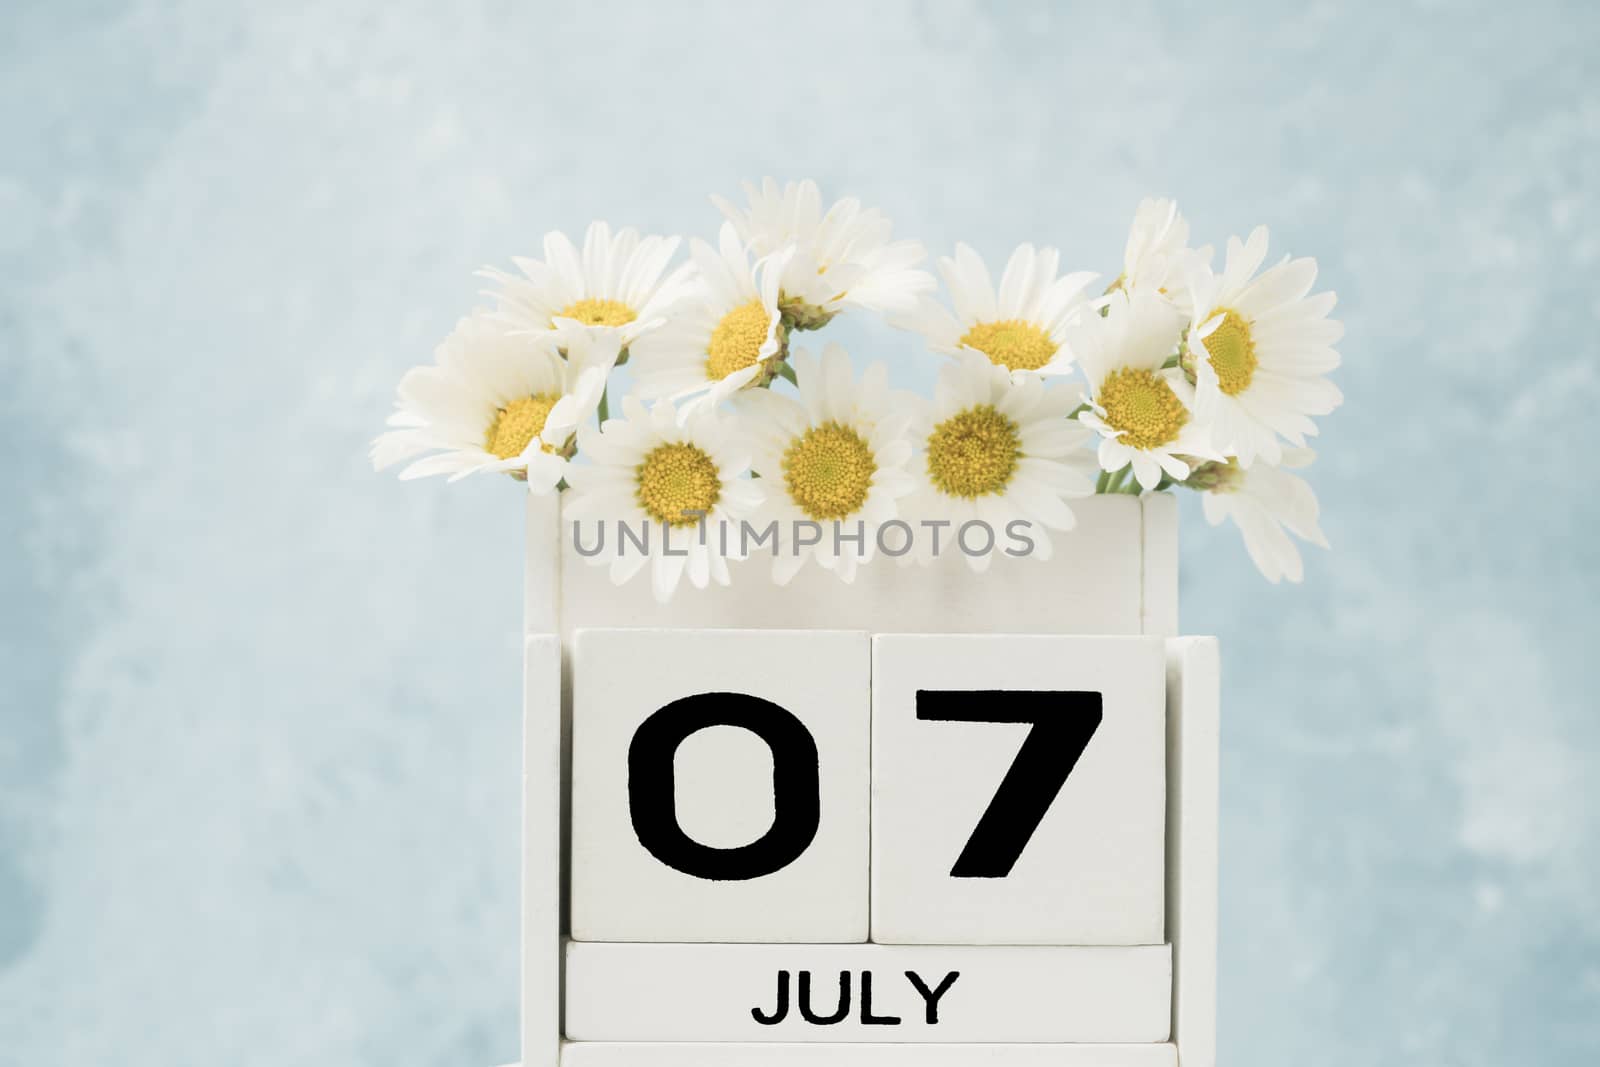 White cube calendar for july decorated with daisy flowers over blue background with copy space